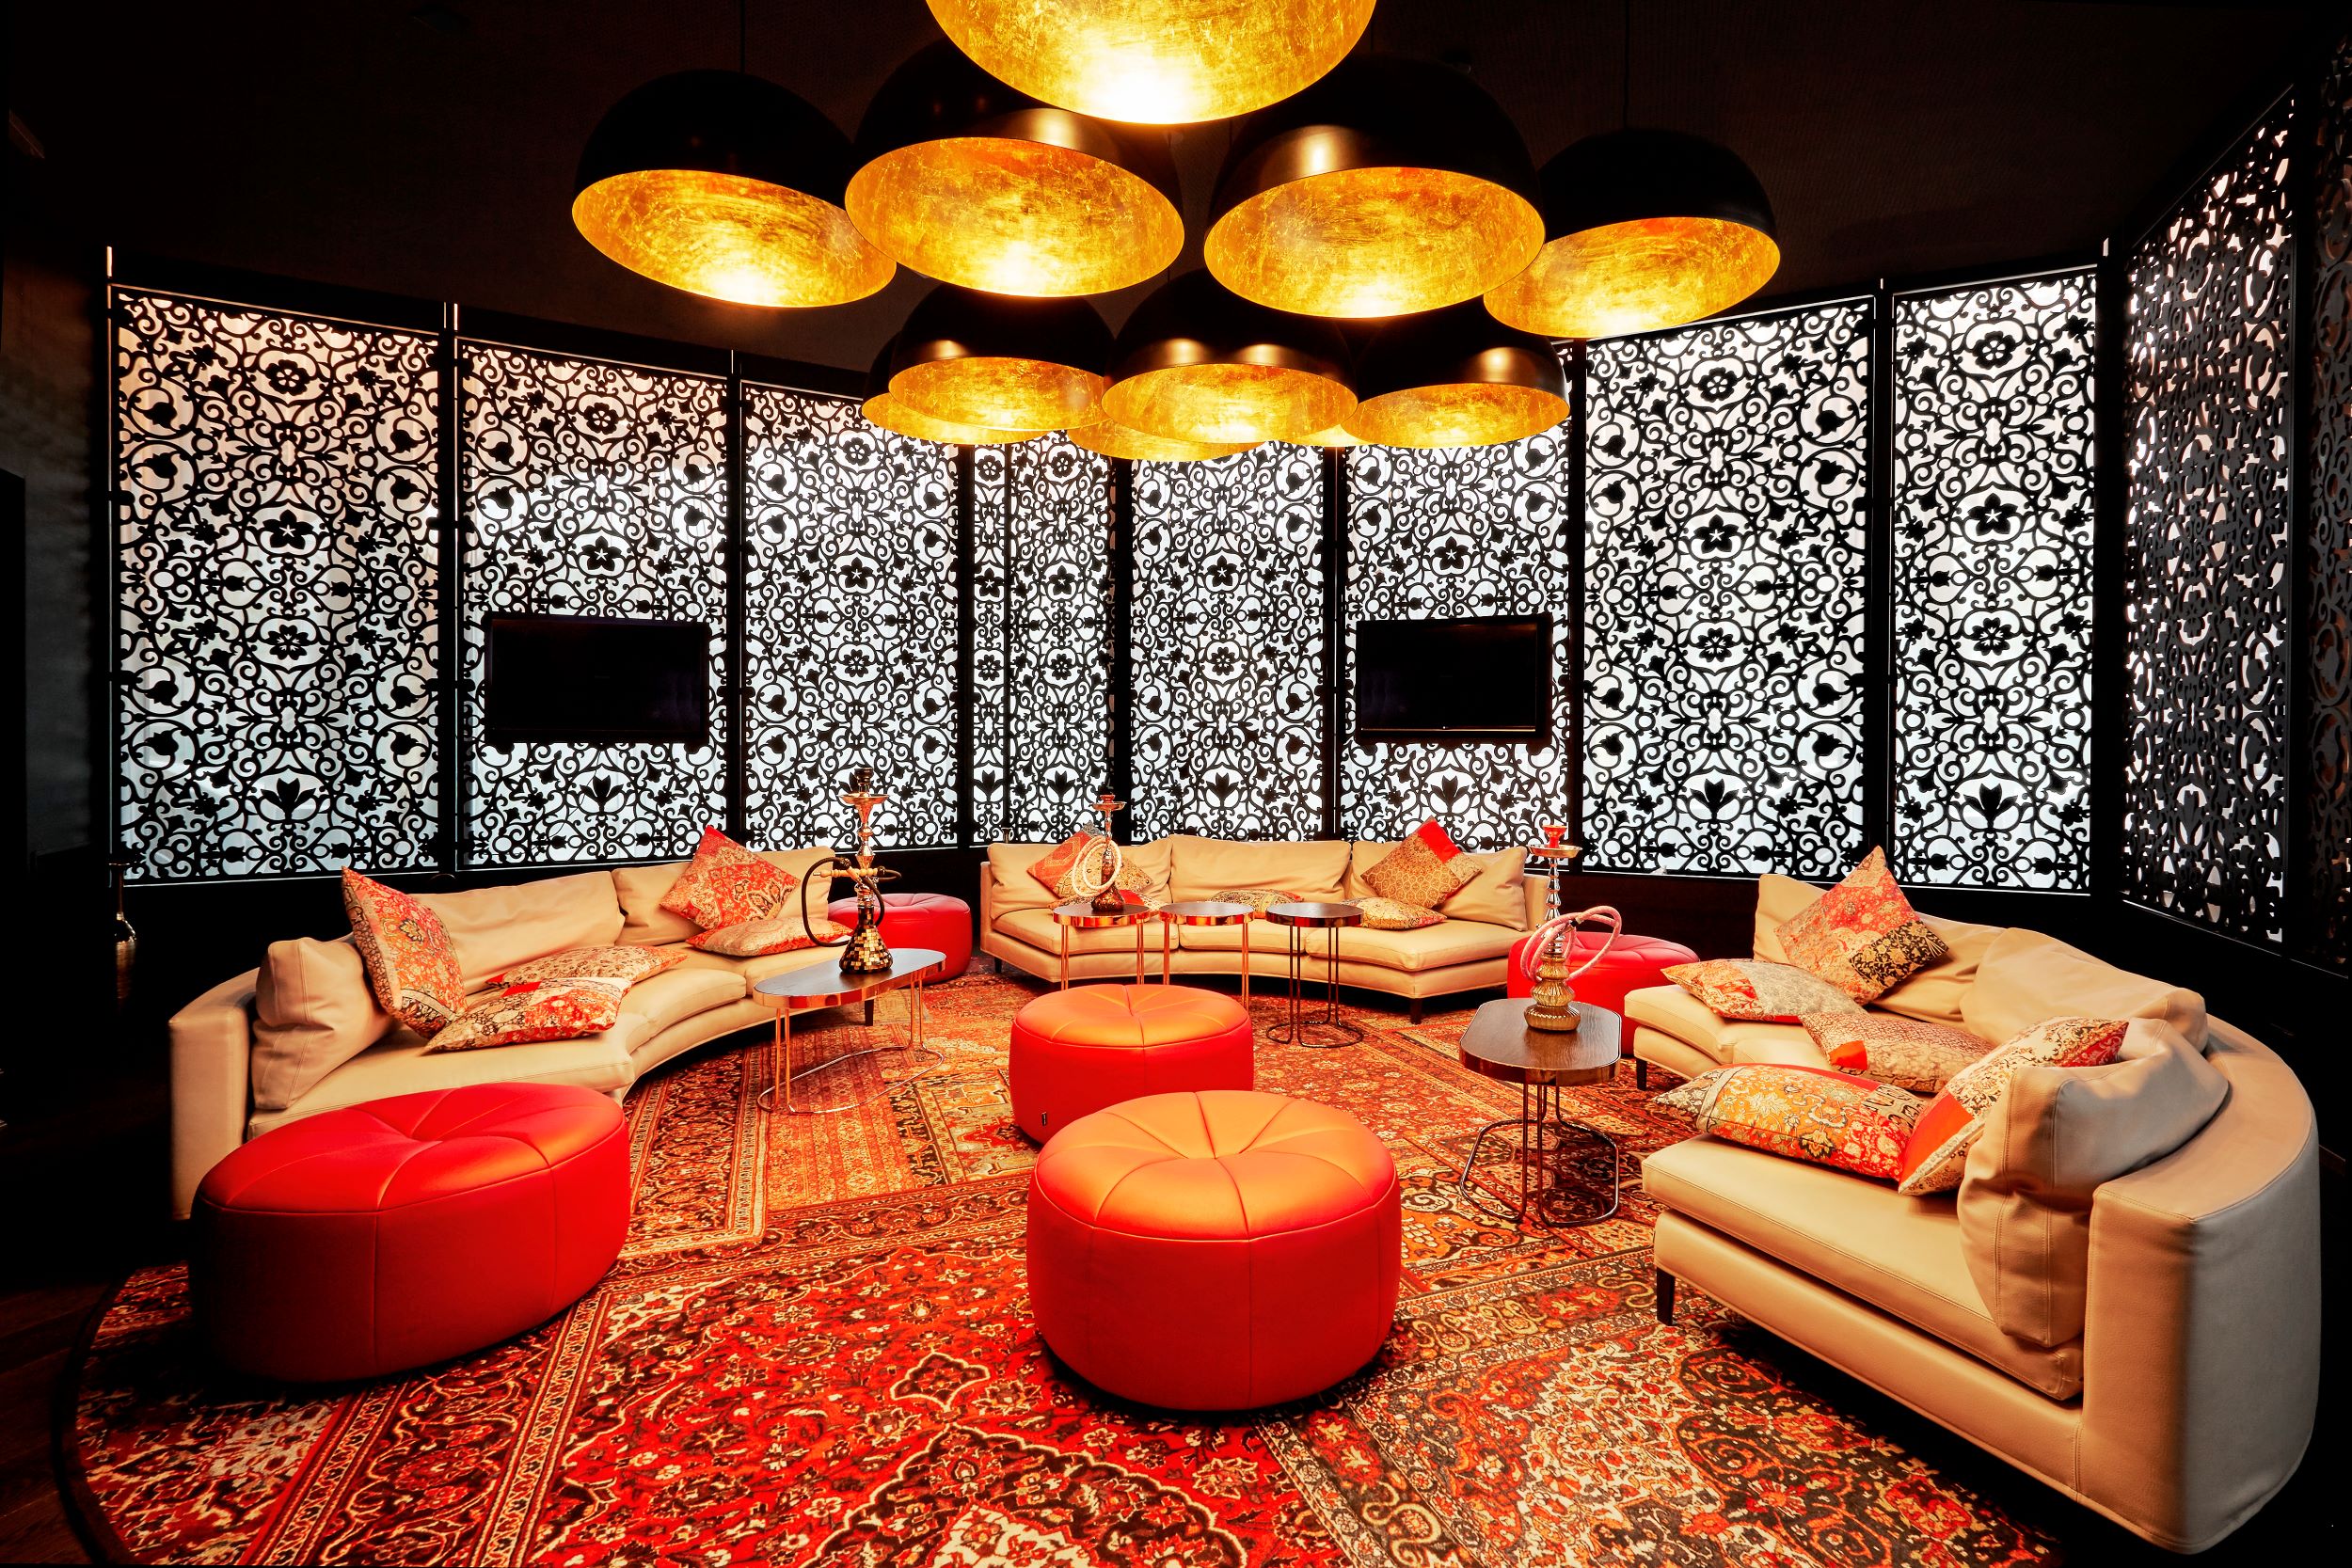 Marcel Wanders - Top Interior Design from Netherlands to the World